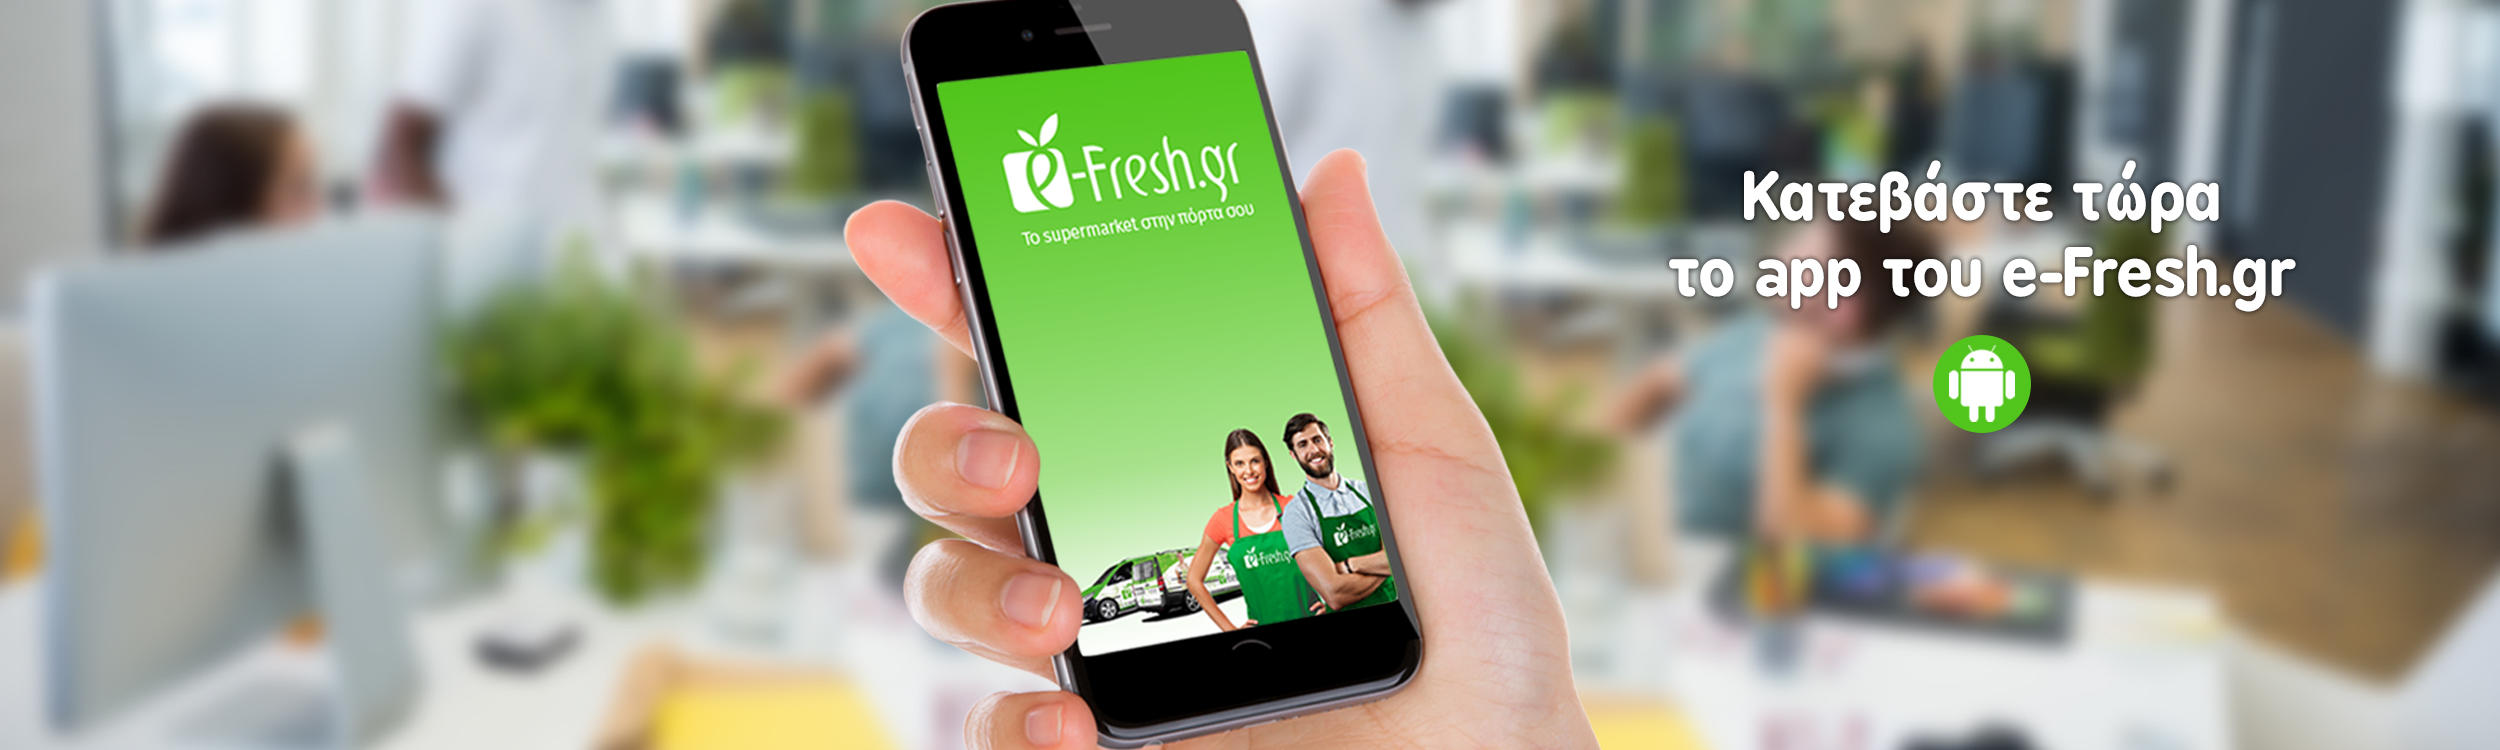 e-Fresh.gr launches its app for android